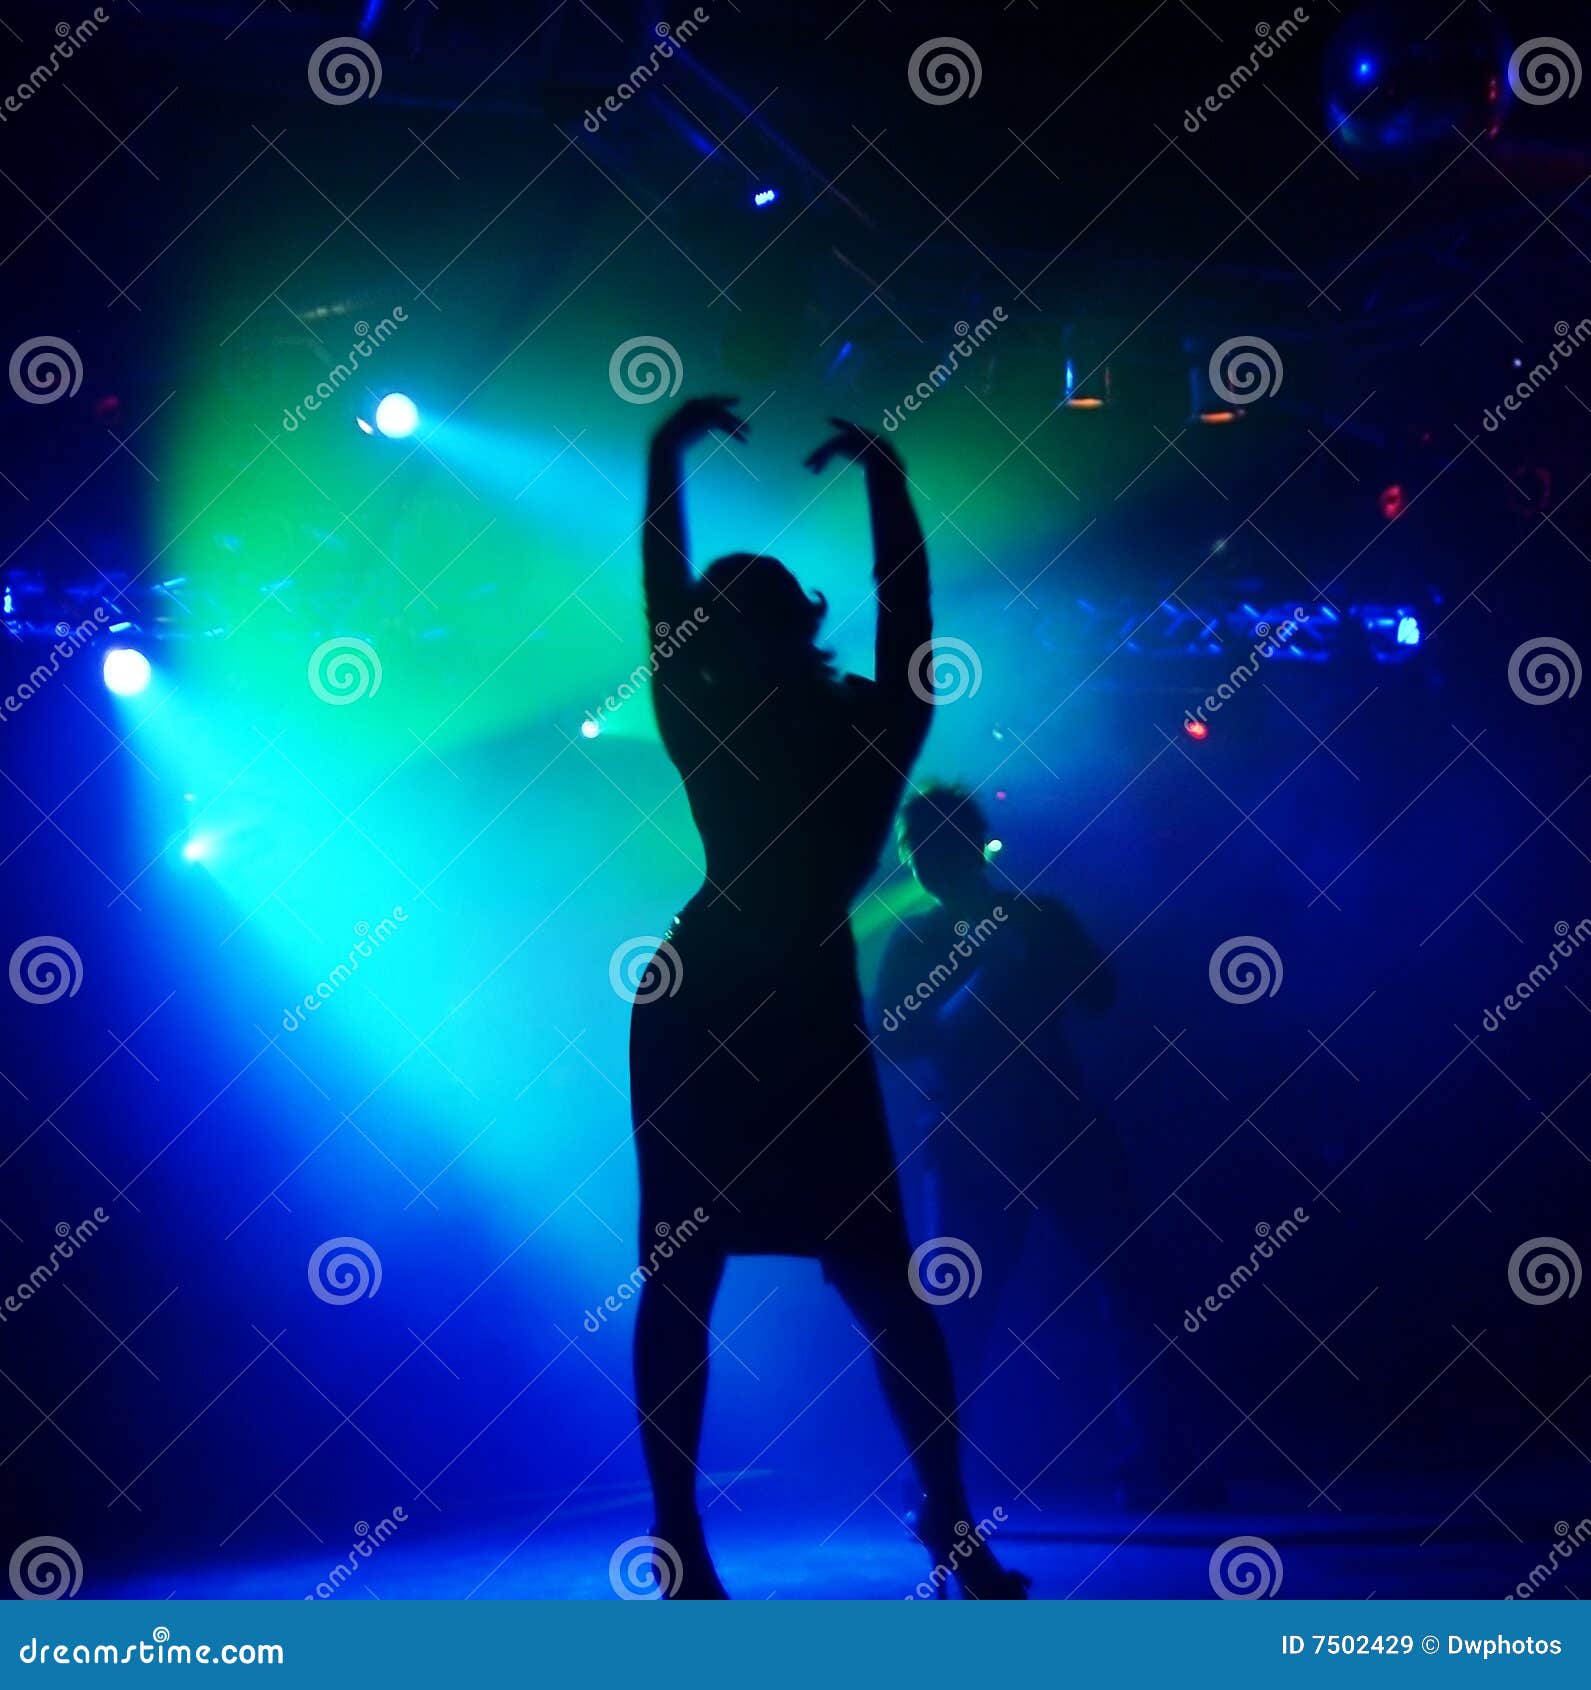 Silhouettes of Dancing People Stock Image - Image of nightclub, bass ...